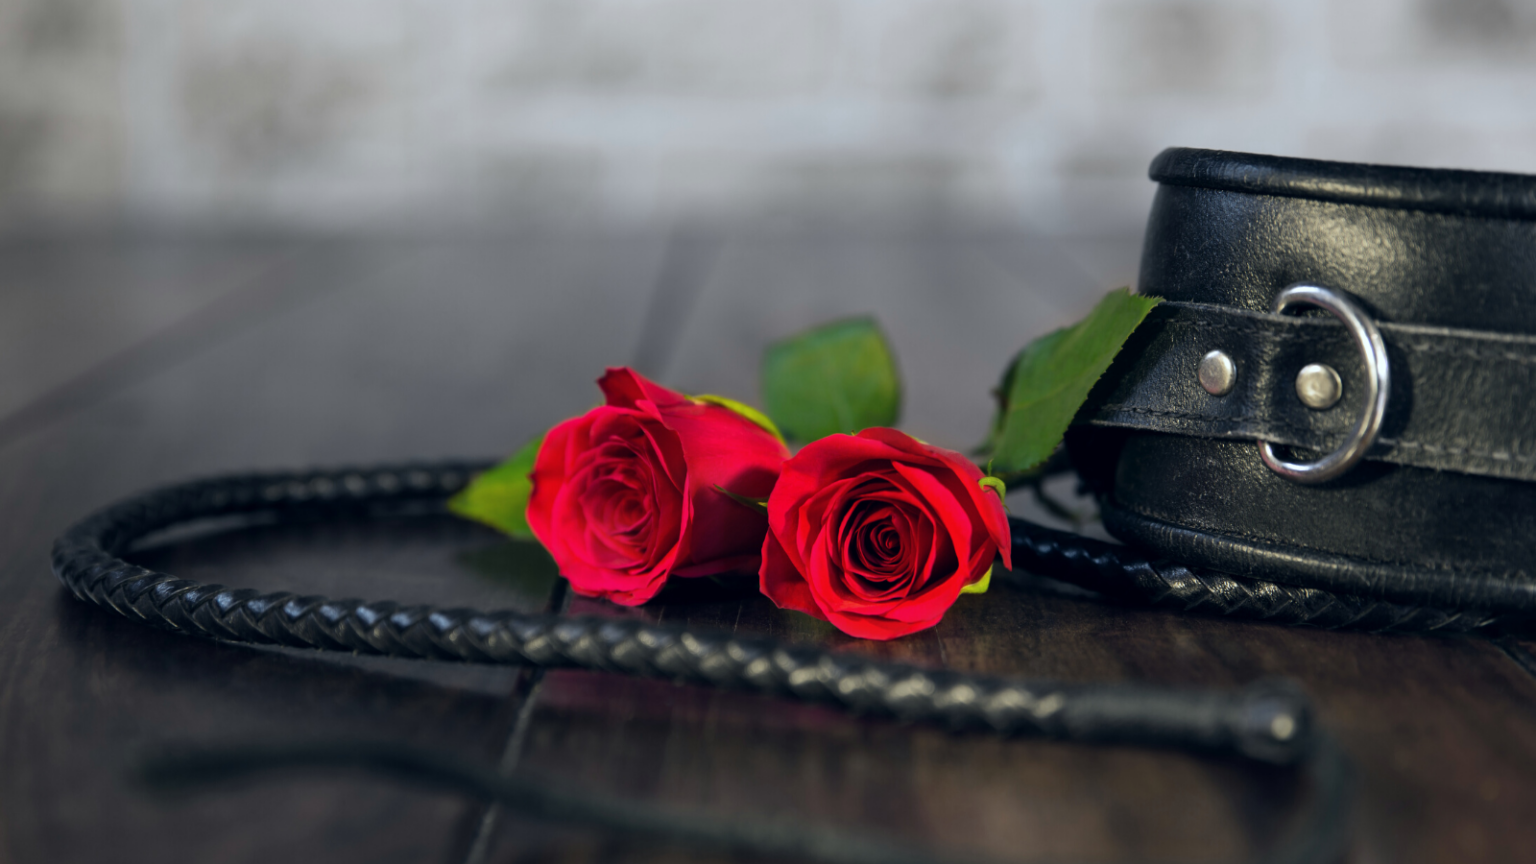 A whip, handcuffs, and two red roses